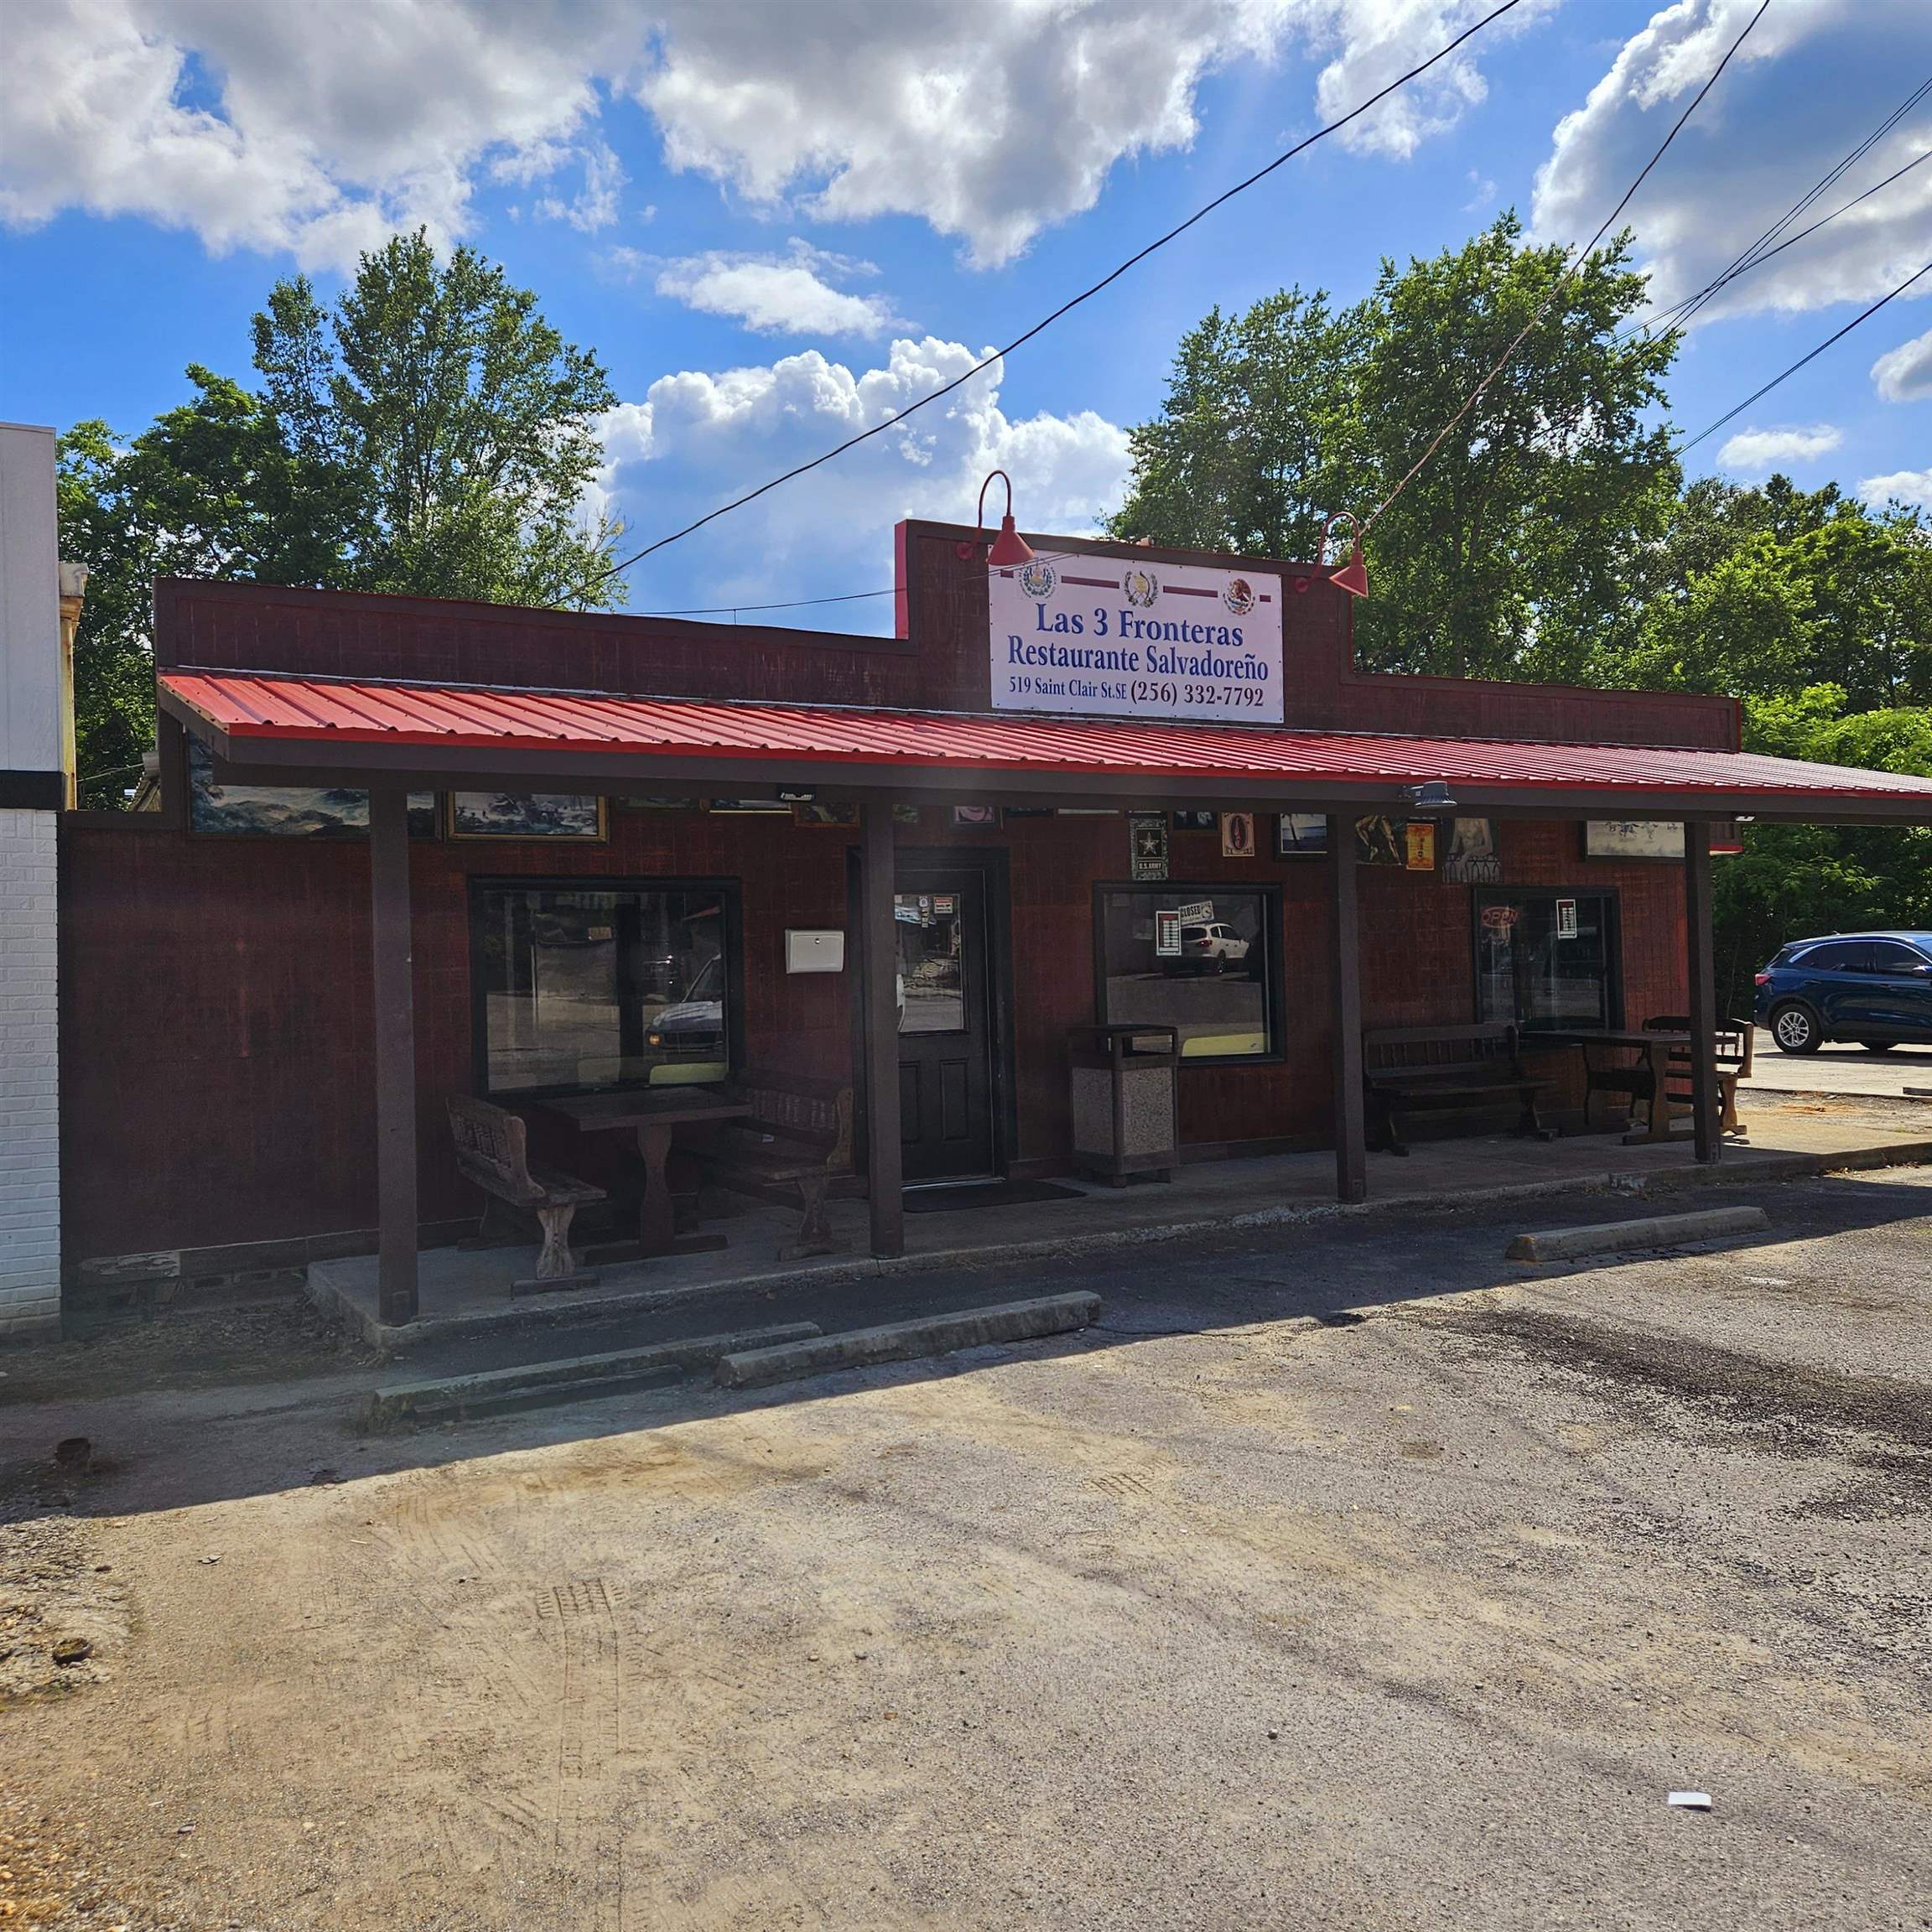 Introducing "Las Tres Fronteras" Restaurant in the heart of Russellville, known for it's authentic, Latin Cusine.  This well established business comes fully furnished.  You'll want to come see it in person.  Hablo Espanol.